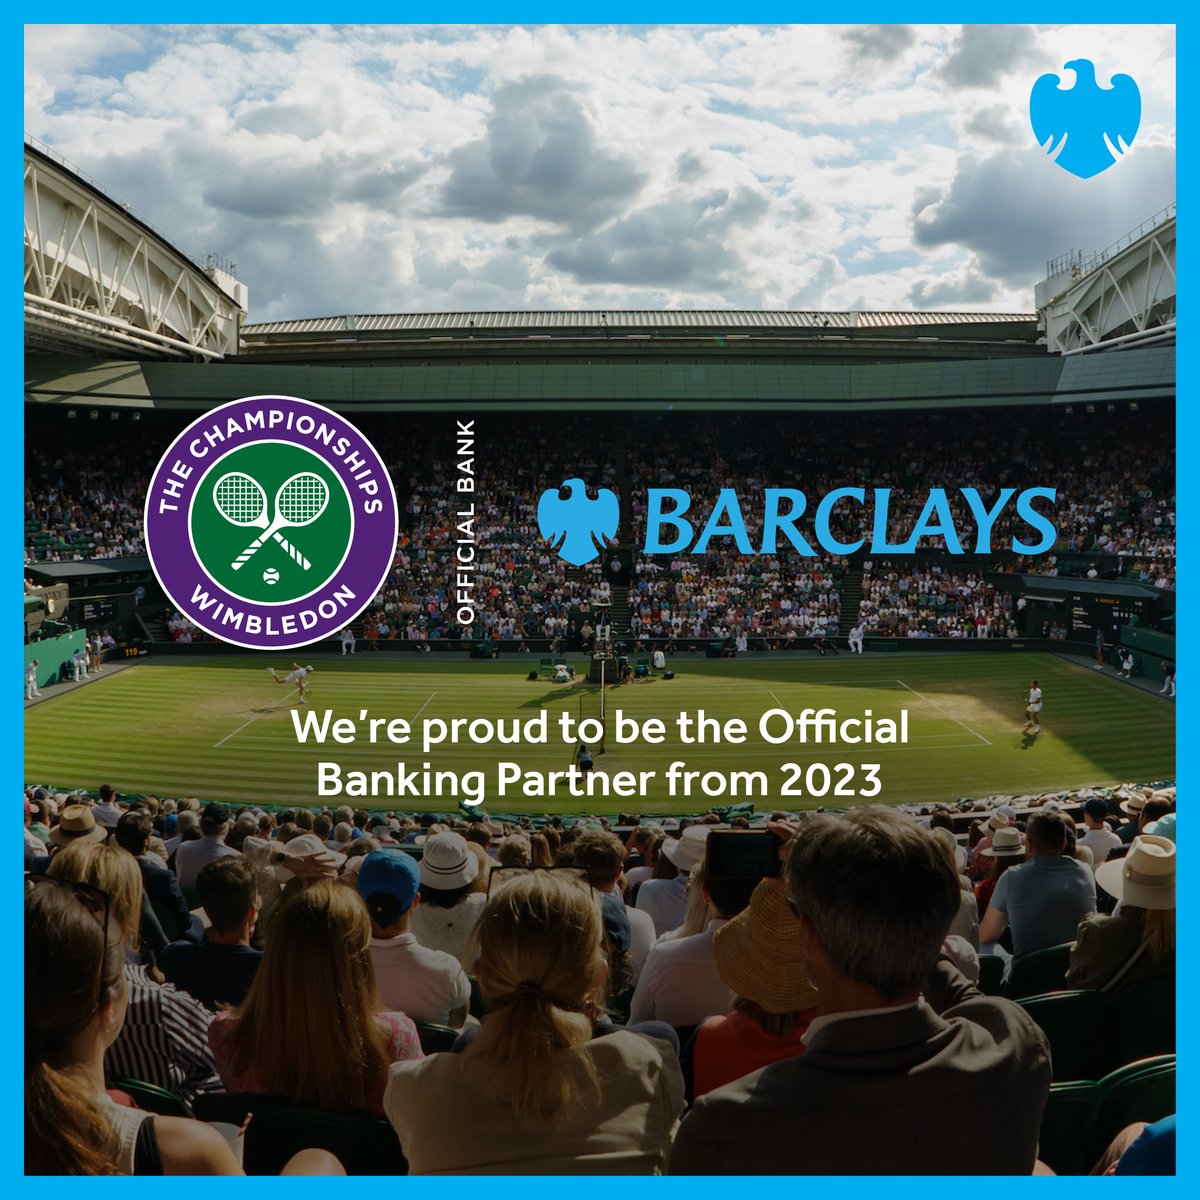 You already know how much we love football, and we’re delighted now to expand our love of sports to tennis 🎾. Barclays is proud to announce that we’re the Official Banking Partner of @Wimbledon from 2023 🎾